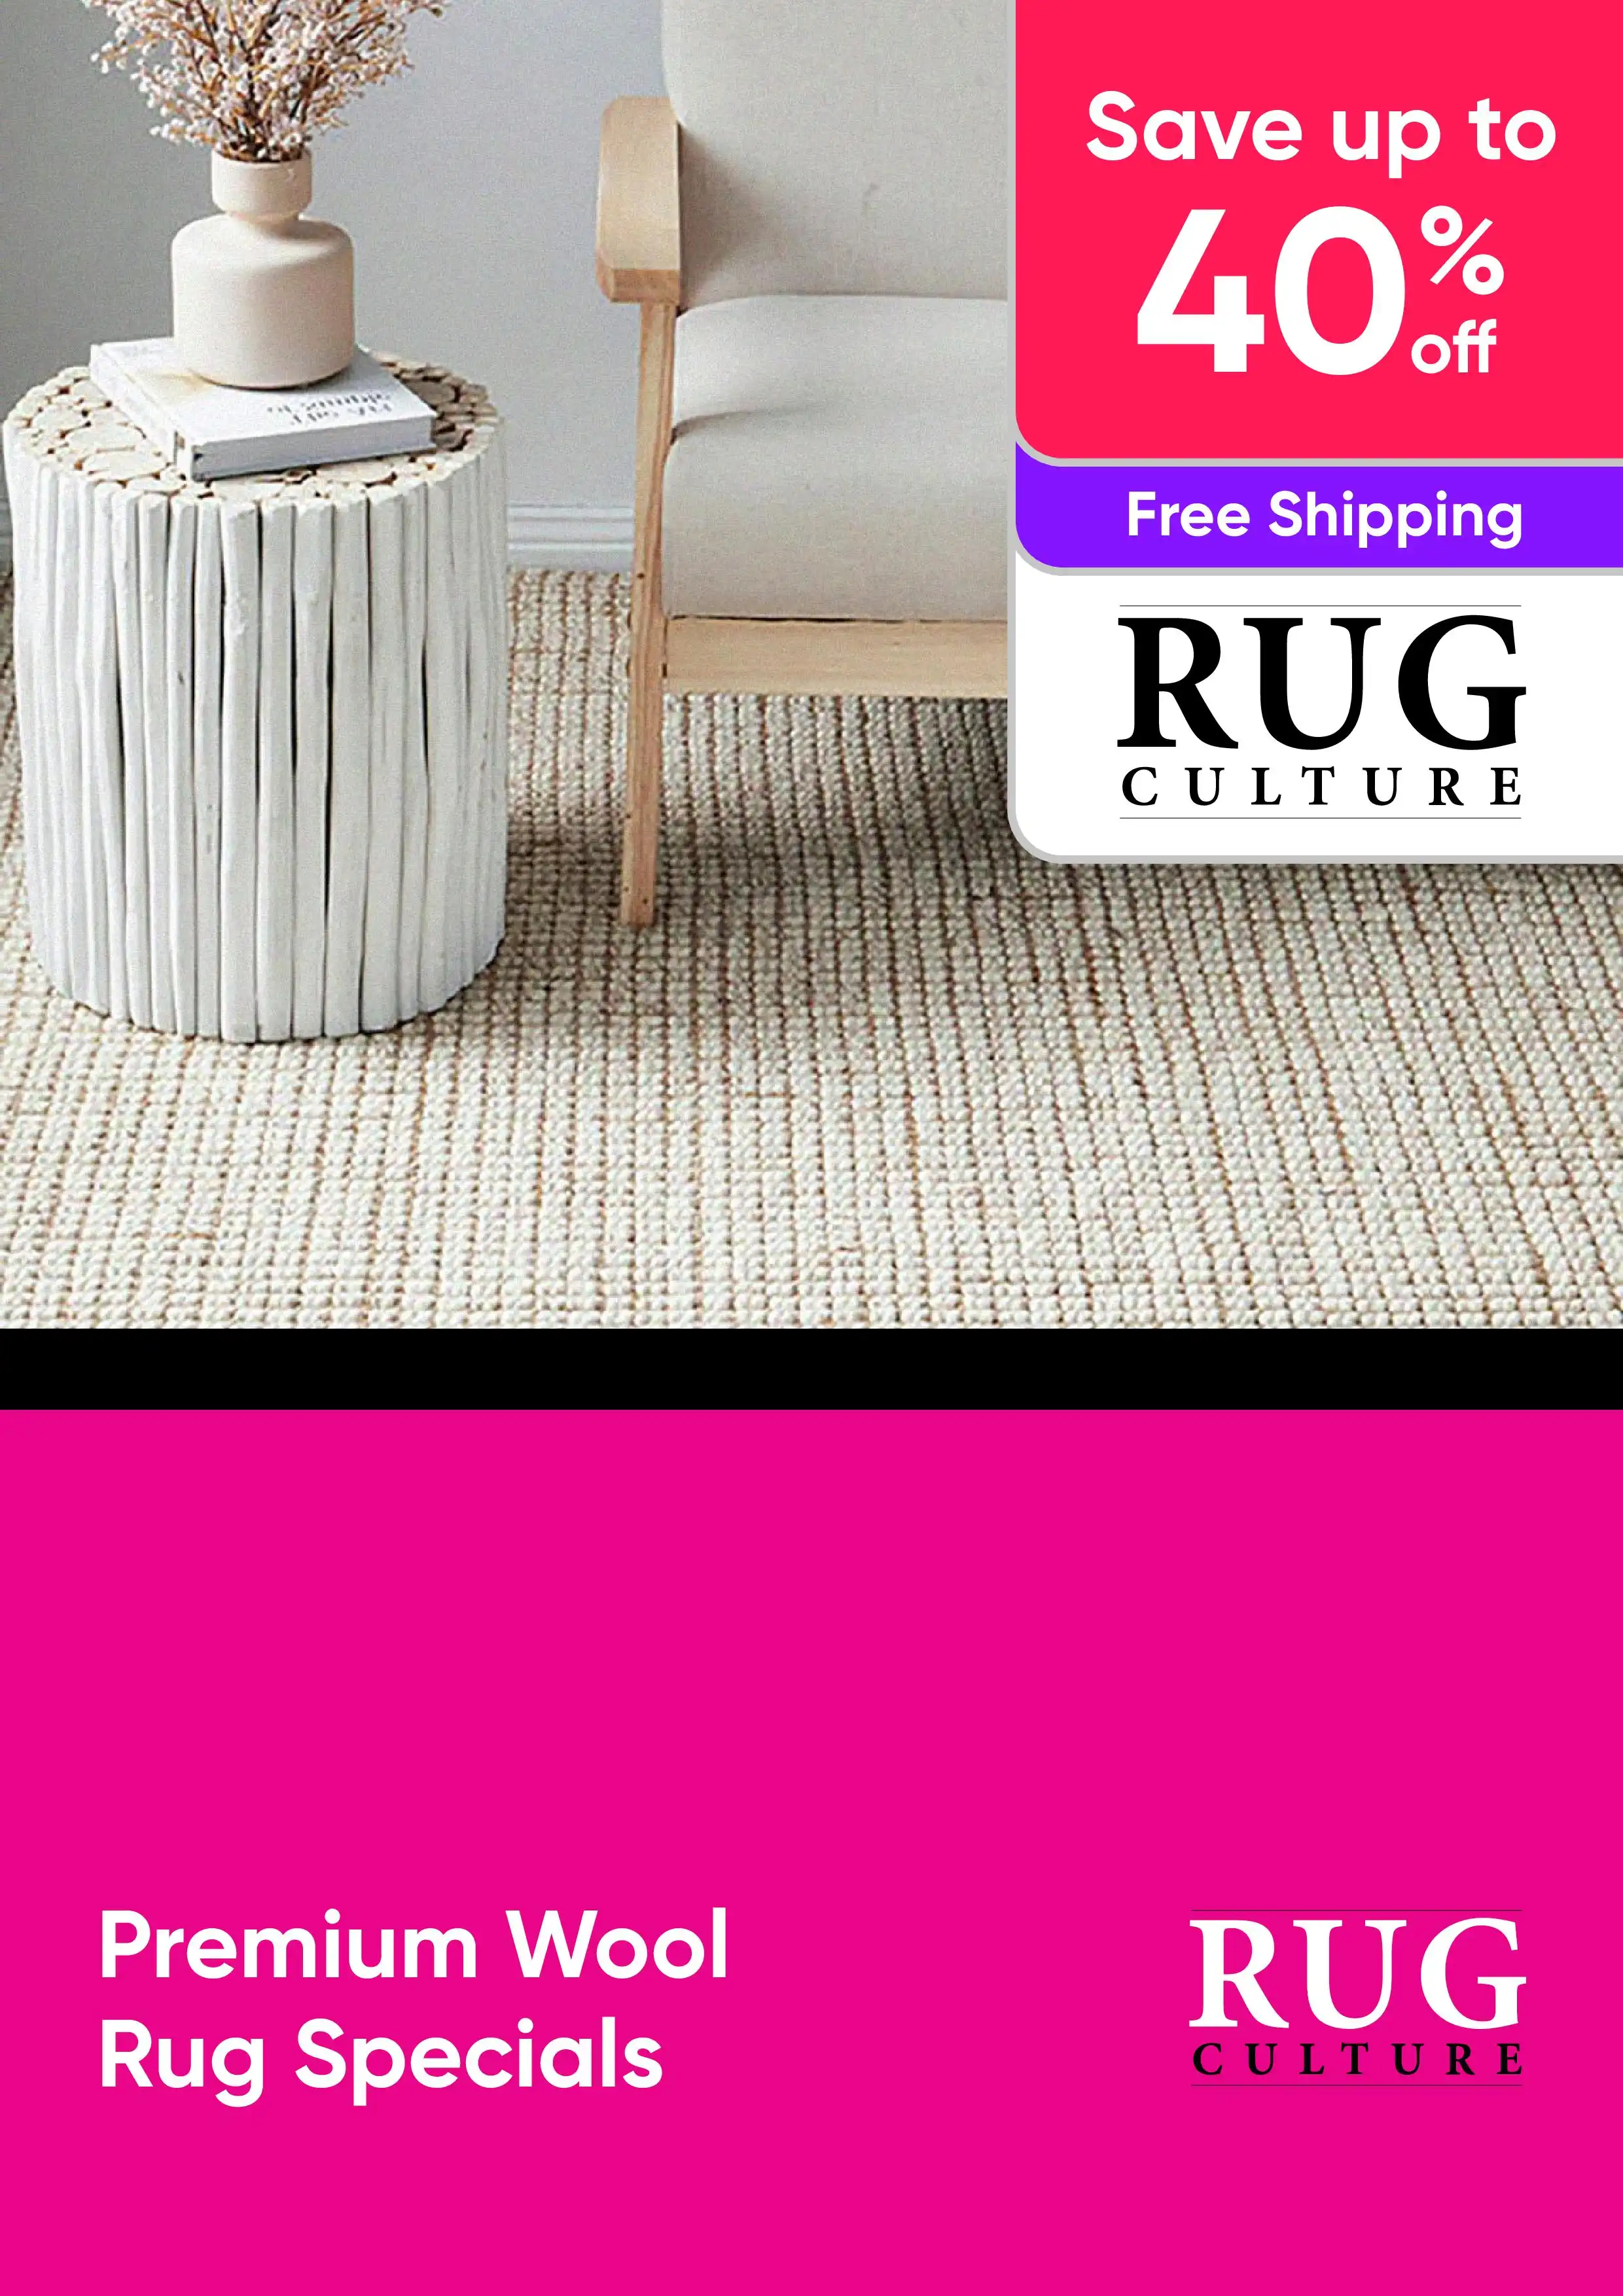 Premium Wool Rug Specials On Sale Now - Up to 40% Off and Free Shipping